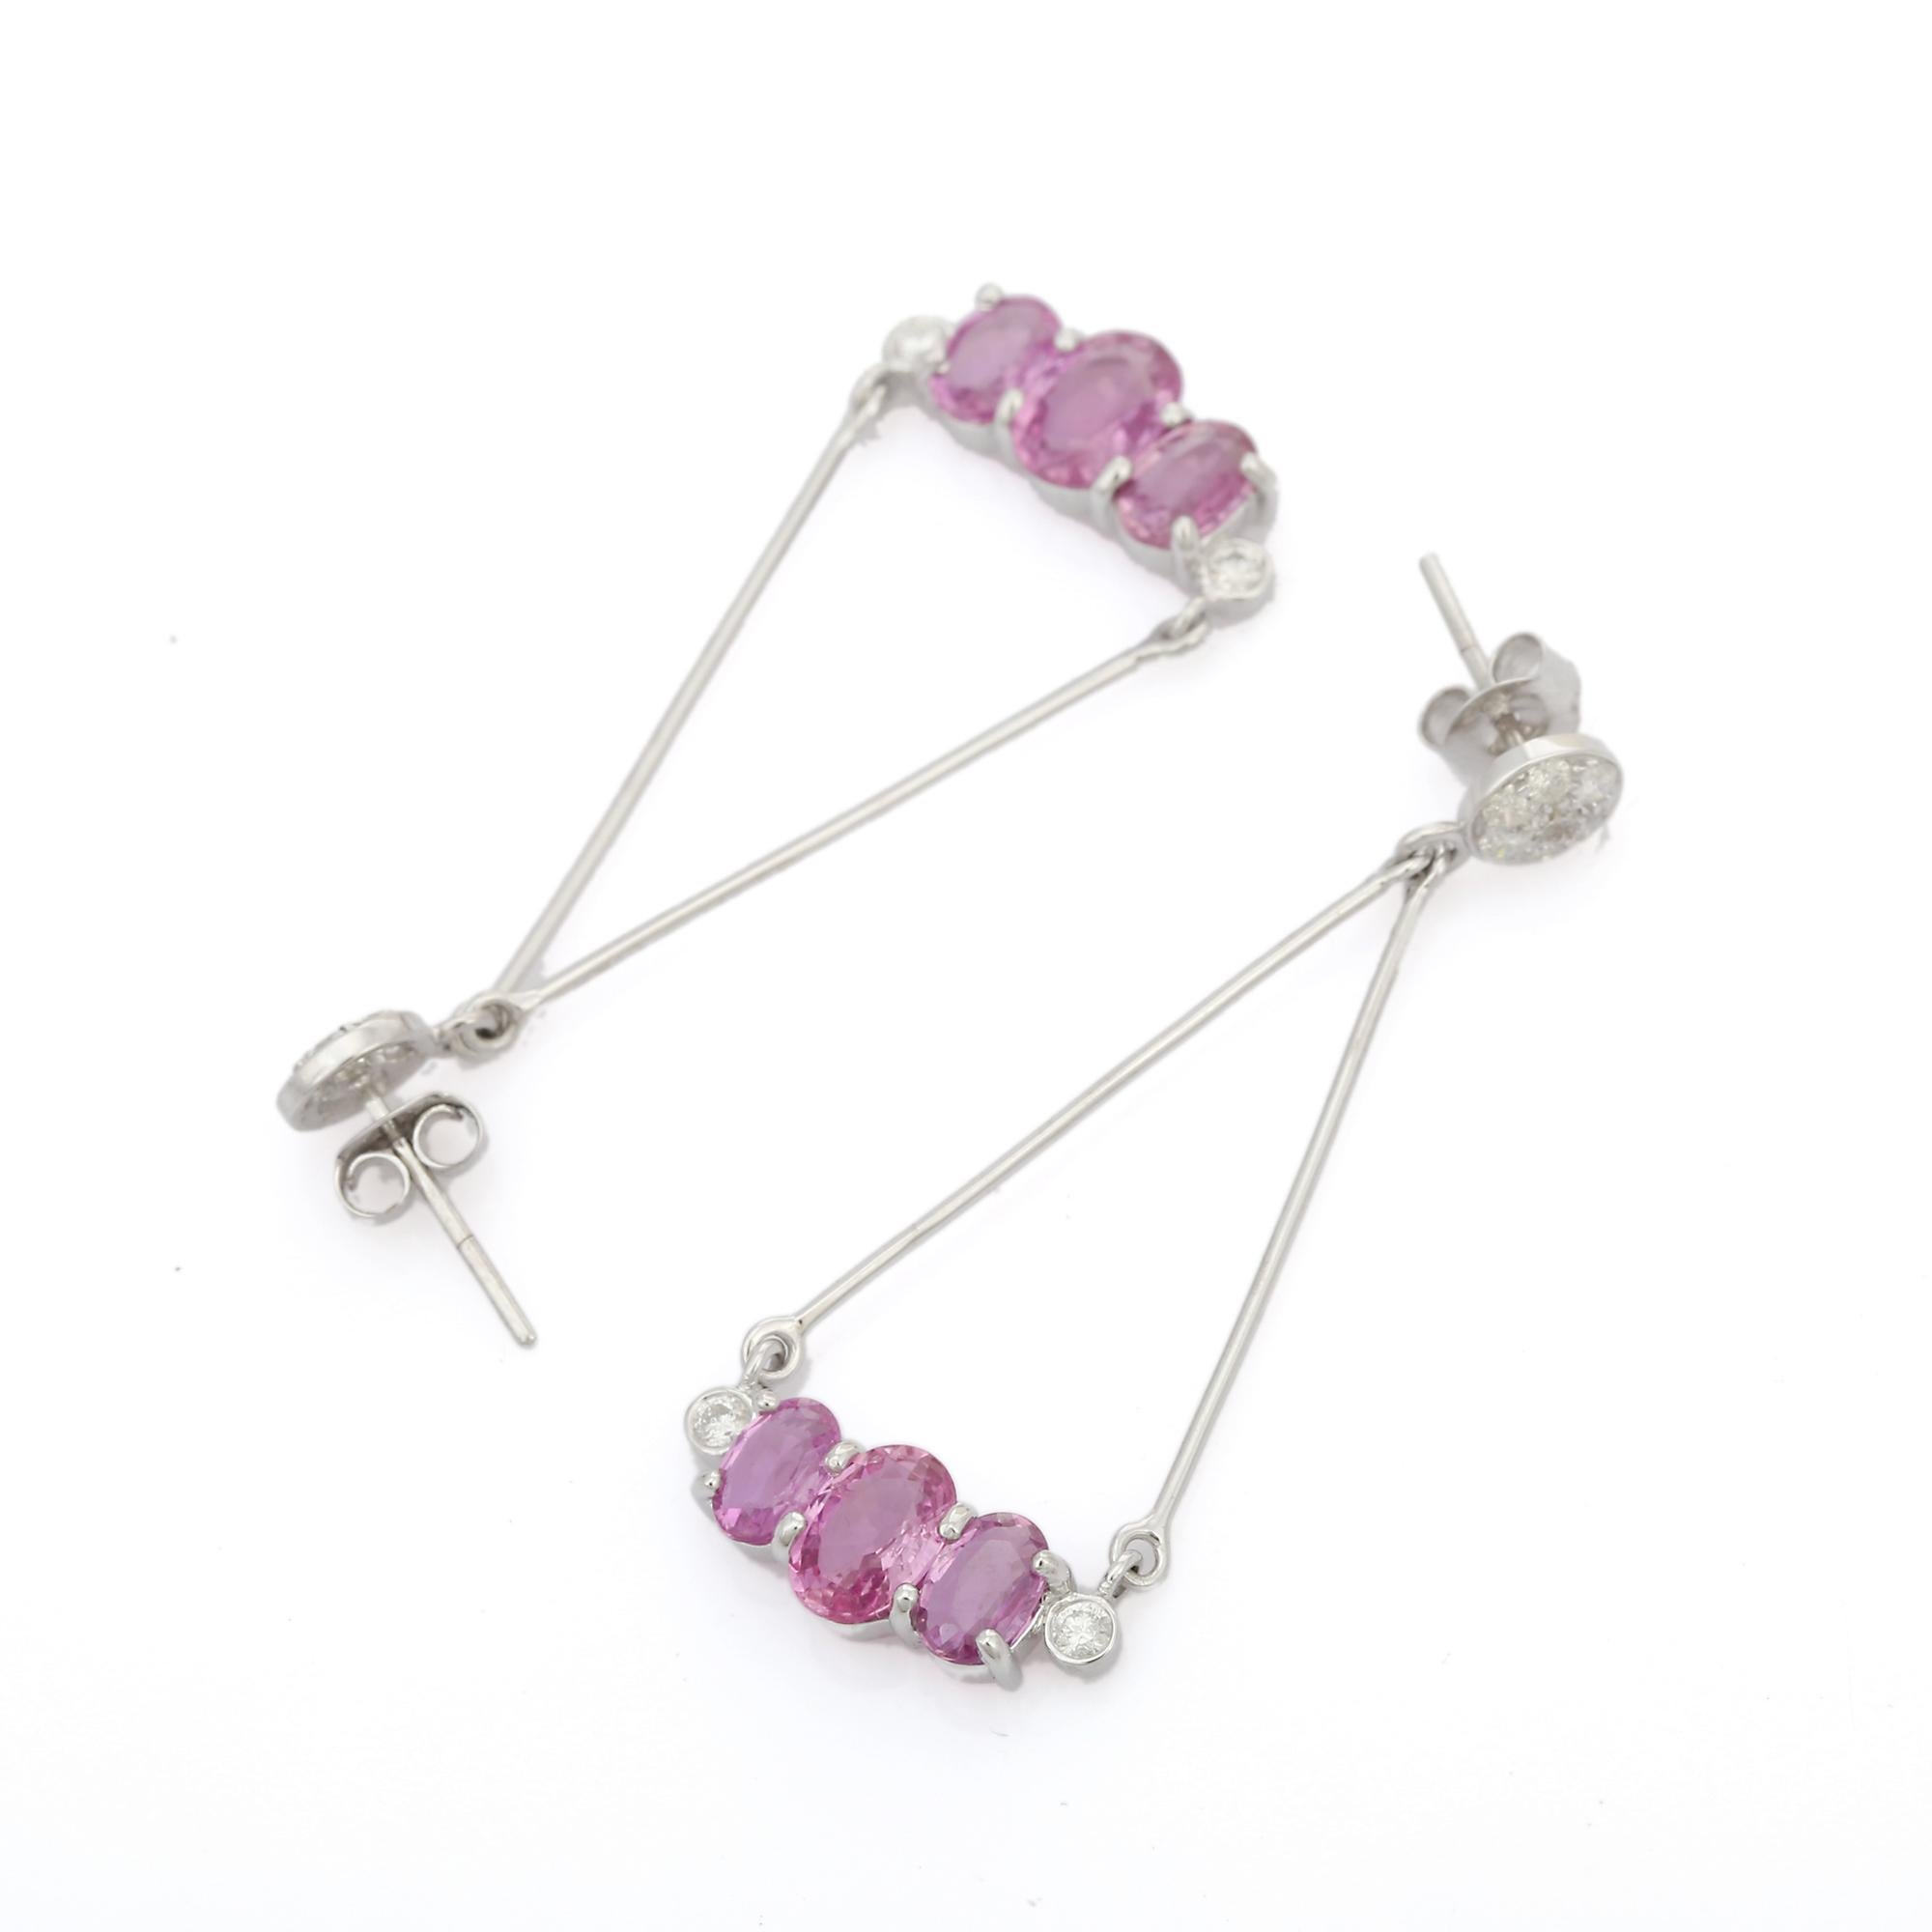 Modern Pink Sapphire Diamond Dangle Earrings in 18K gold to make a statement with your look. These earrings create a sparkling, luxurious look featuring oval cut sapphire.
Sapphire stimulate concentration and reduces stress.
Designed with round cut